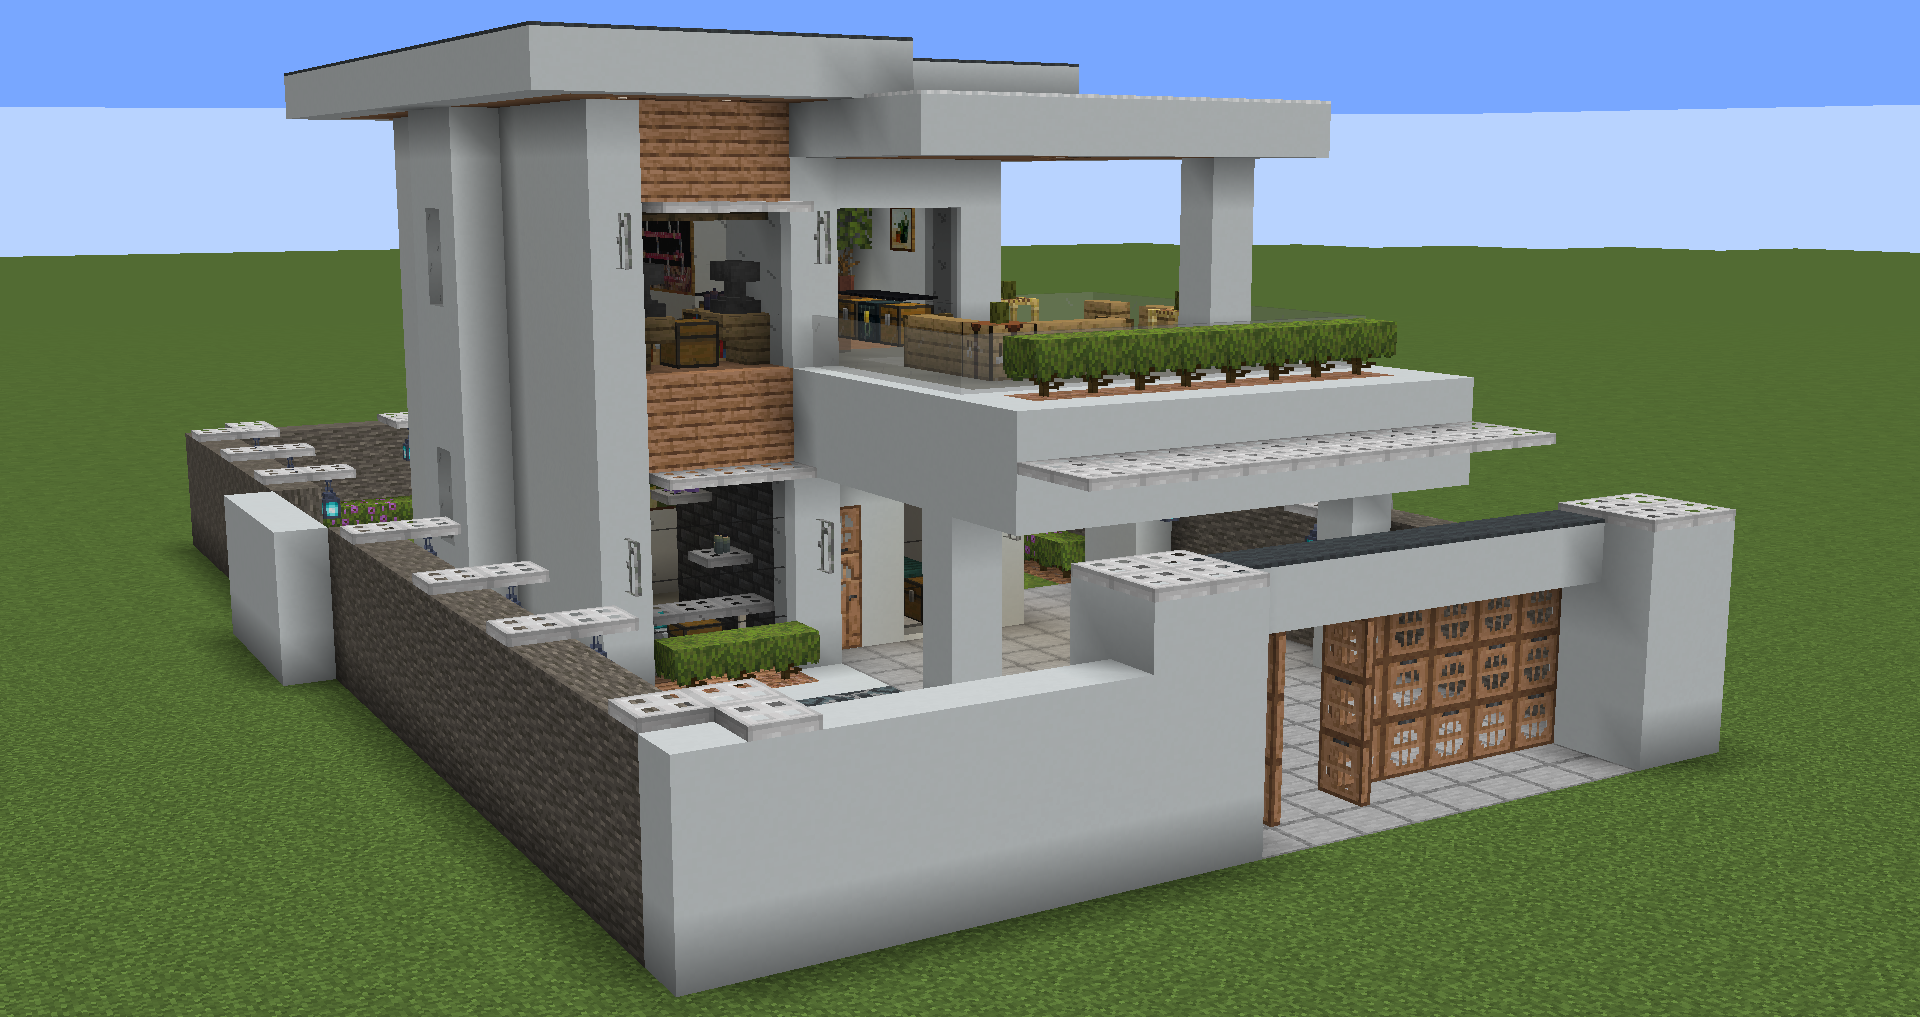 Minecract July House Contest Entry schematic (litematic)